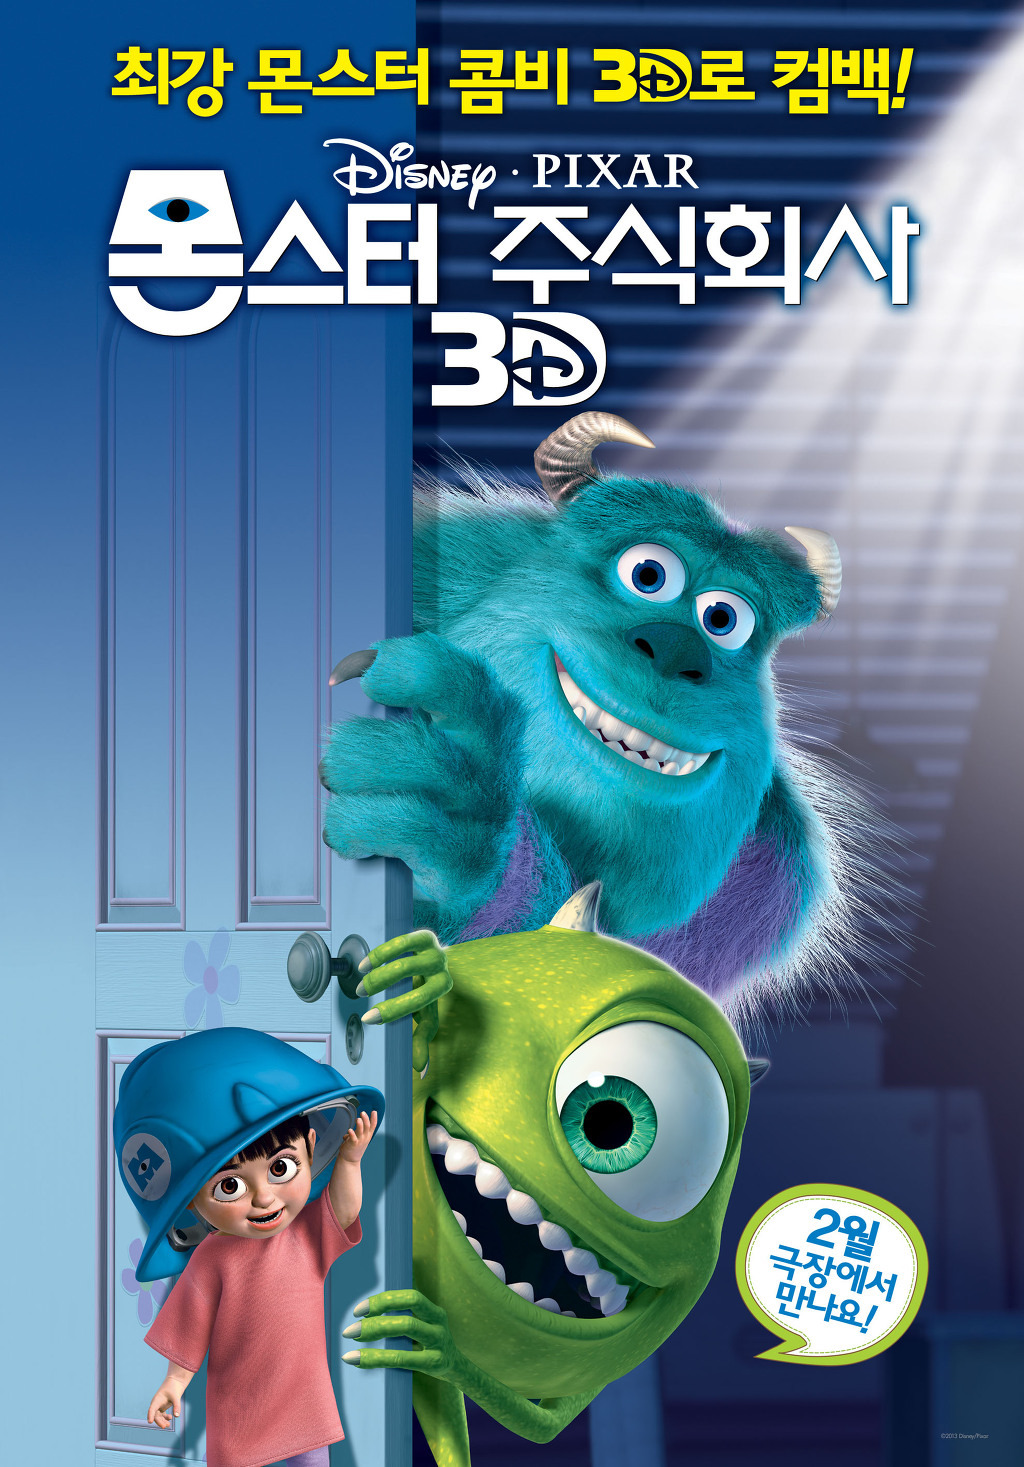 Extra Large Movie Poster Image for Monsters, Inc. (#8 of 10)